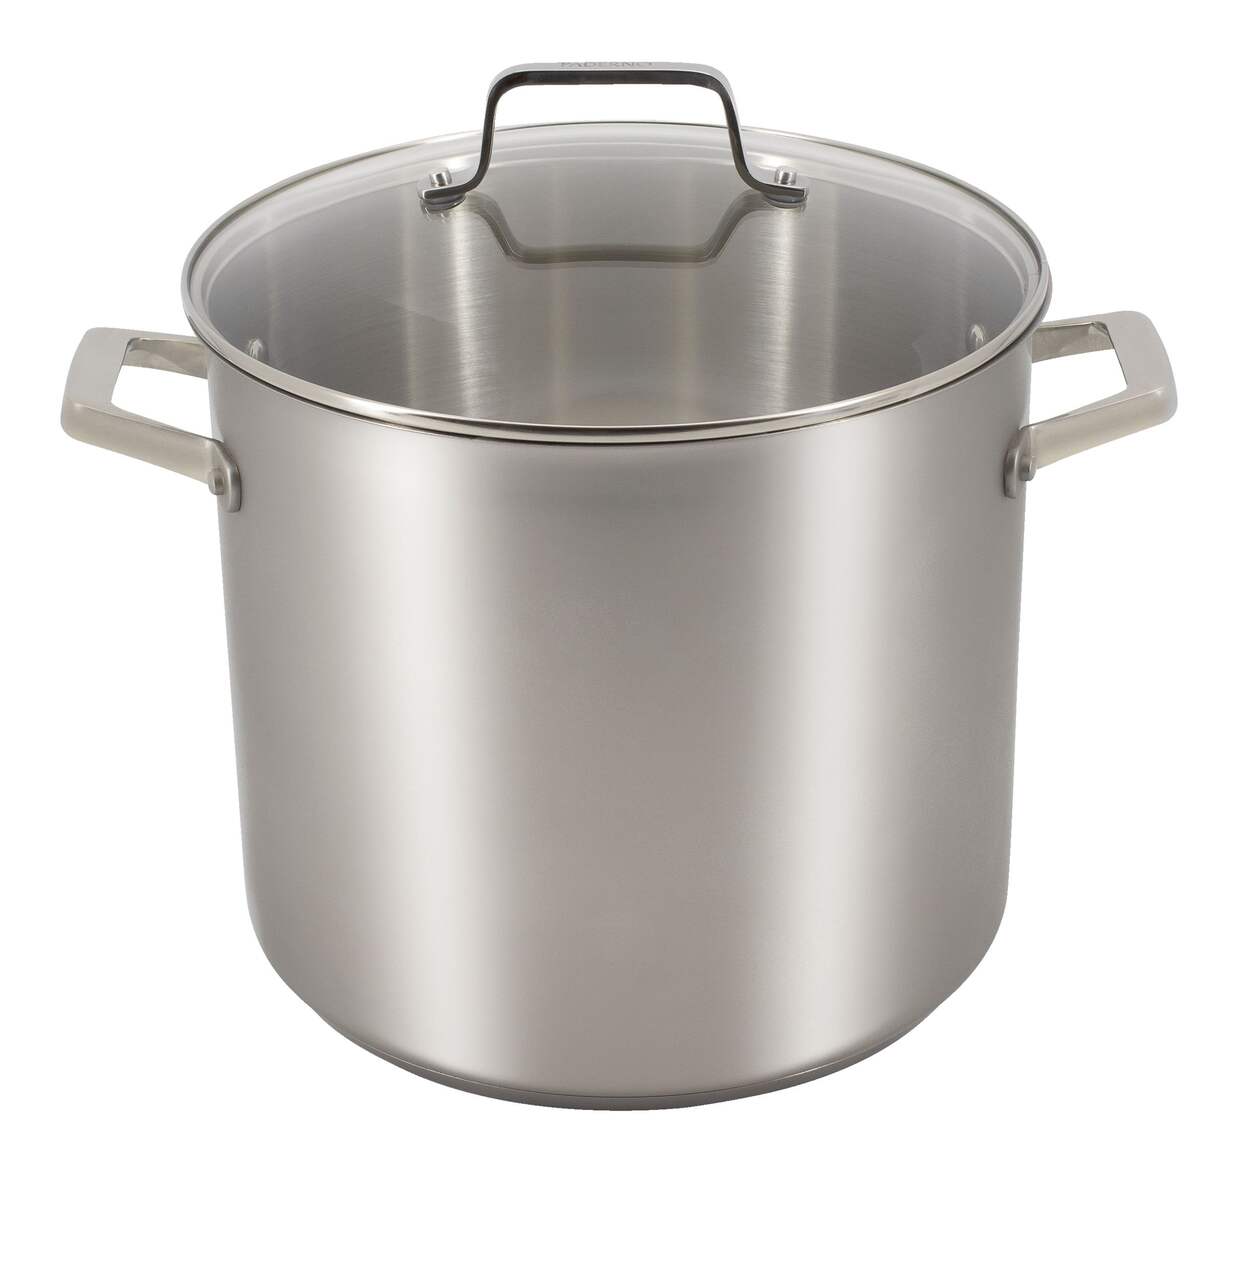 PADERNO Signature 18/10 Stainless Steel Stock Pot, Dishwasher & Oven Safe,  16-qt